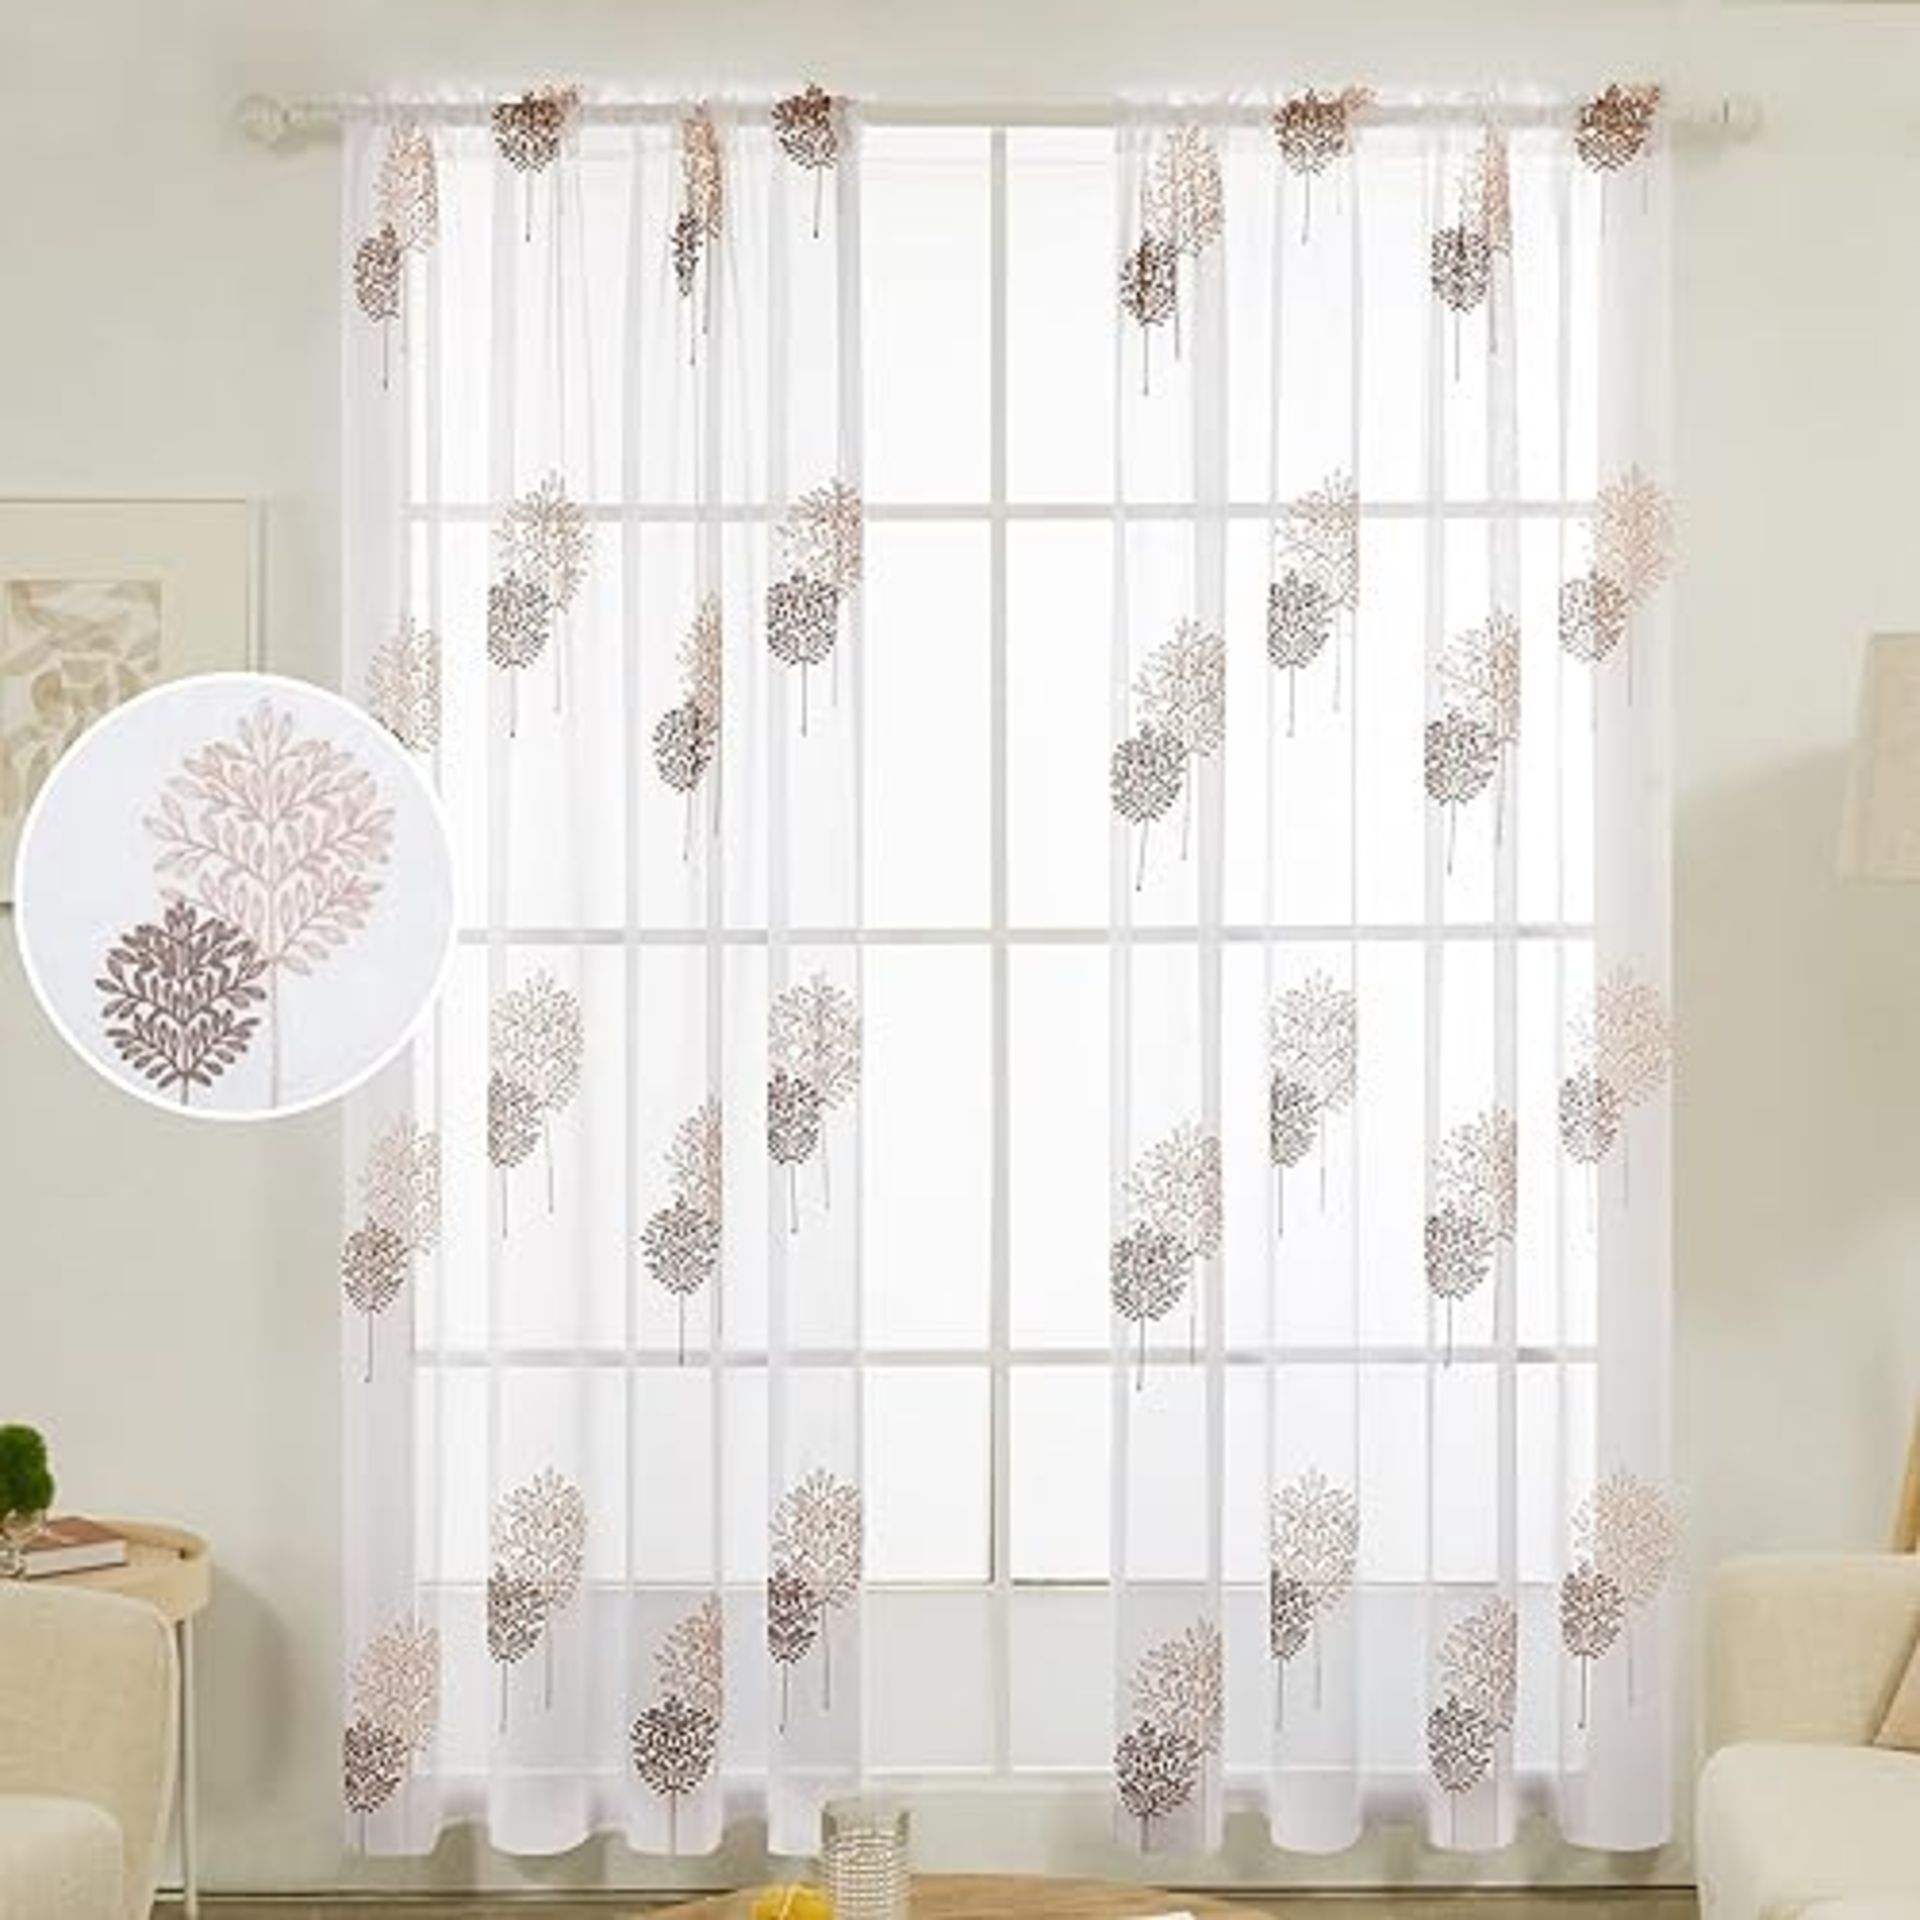 Deconovo Semi Transparent Sheer Curtains Faux Linen Rod Pocket Leaves Embroidery Net Curtains for W